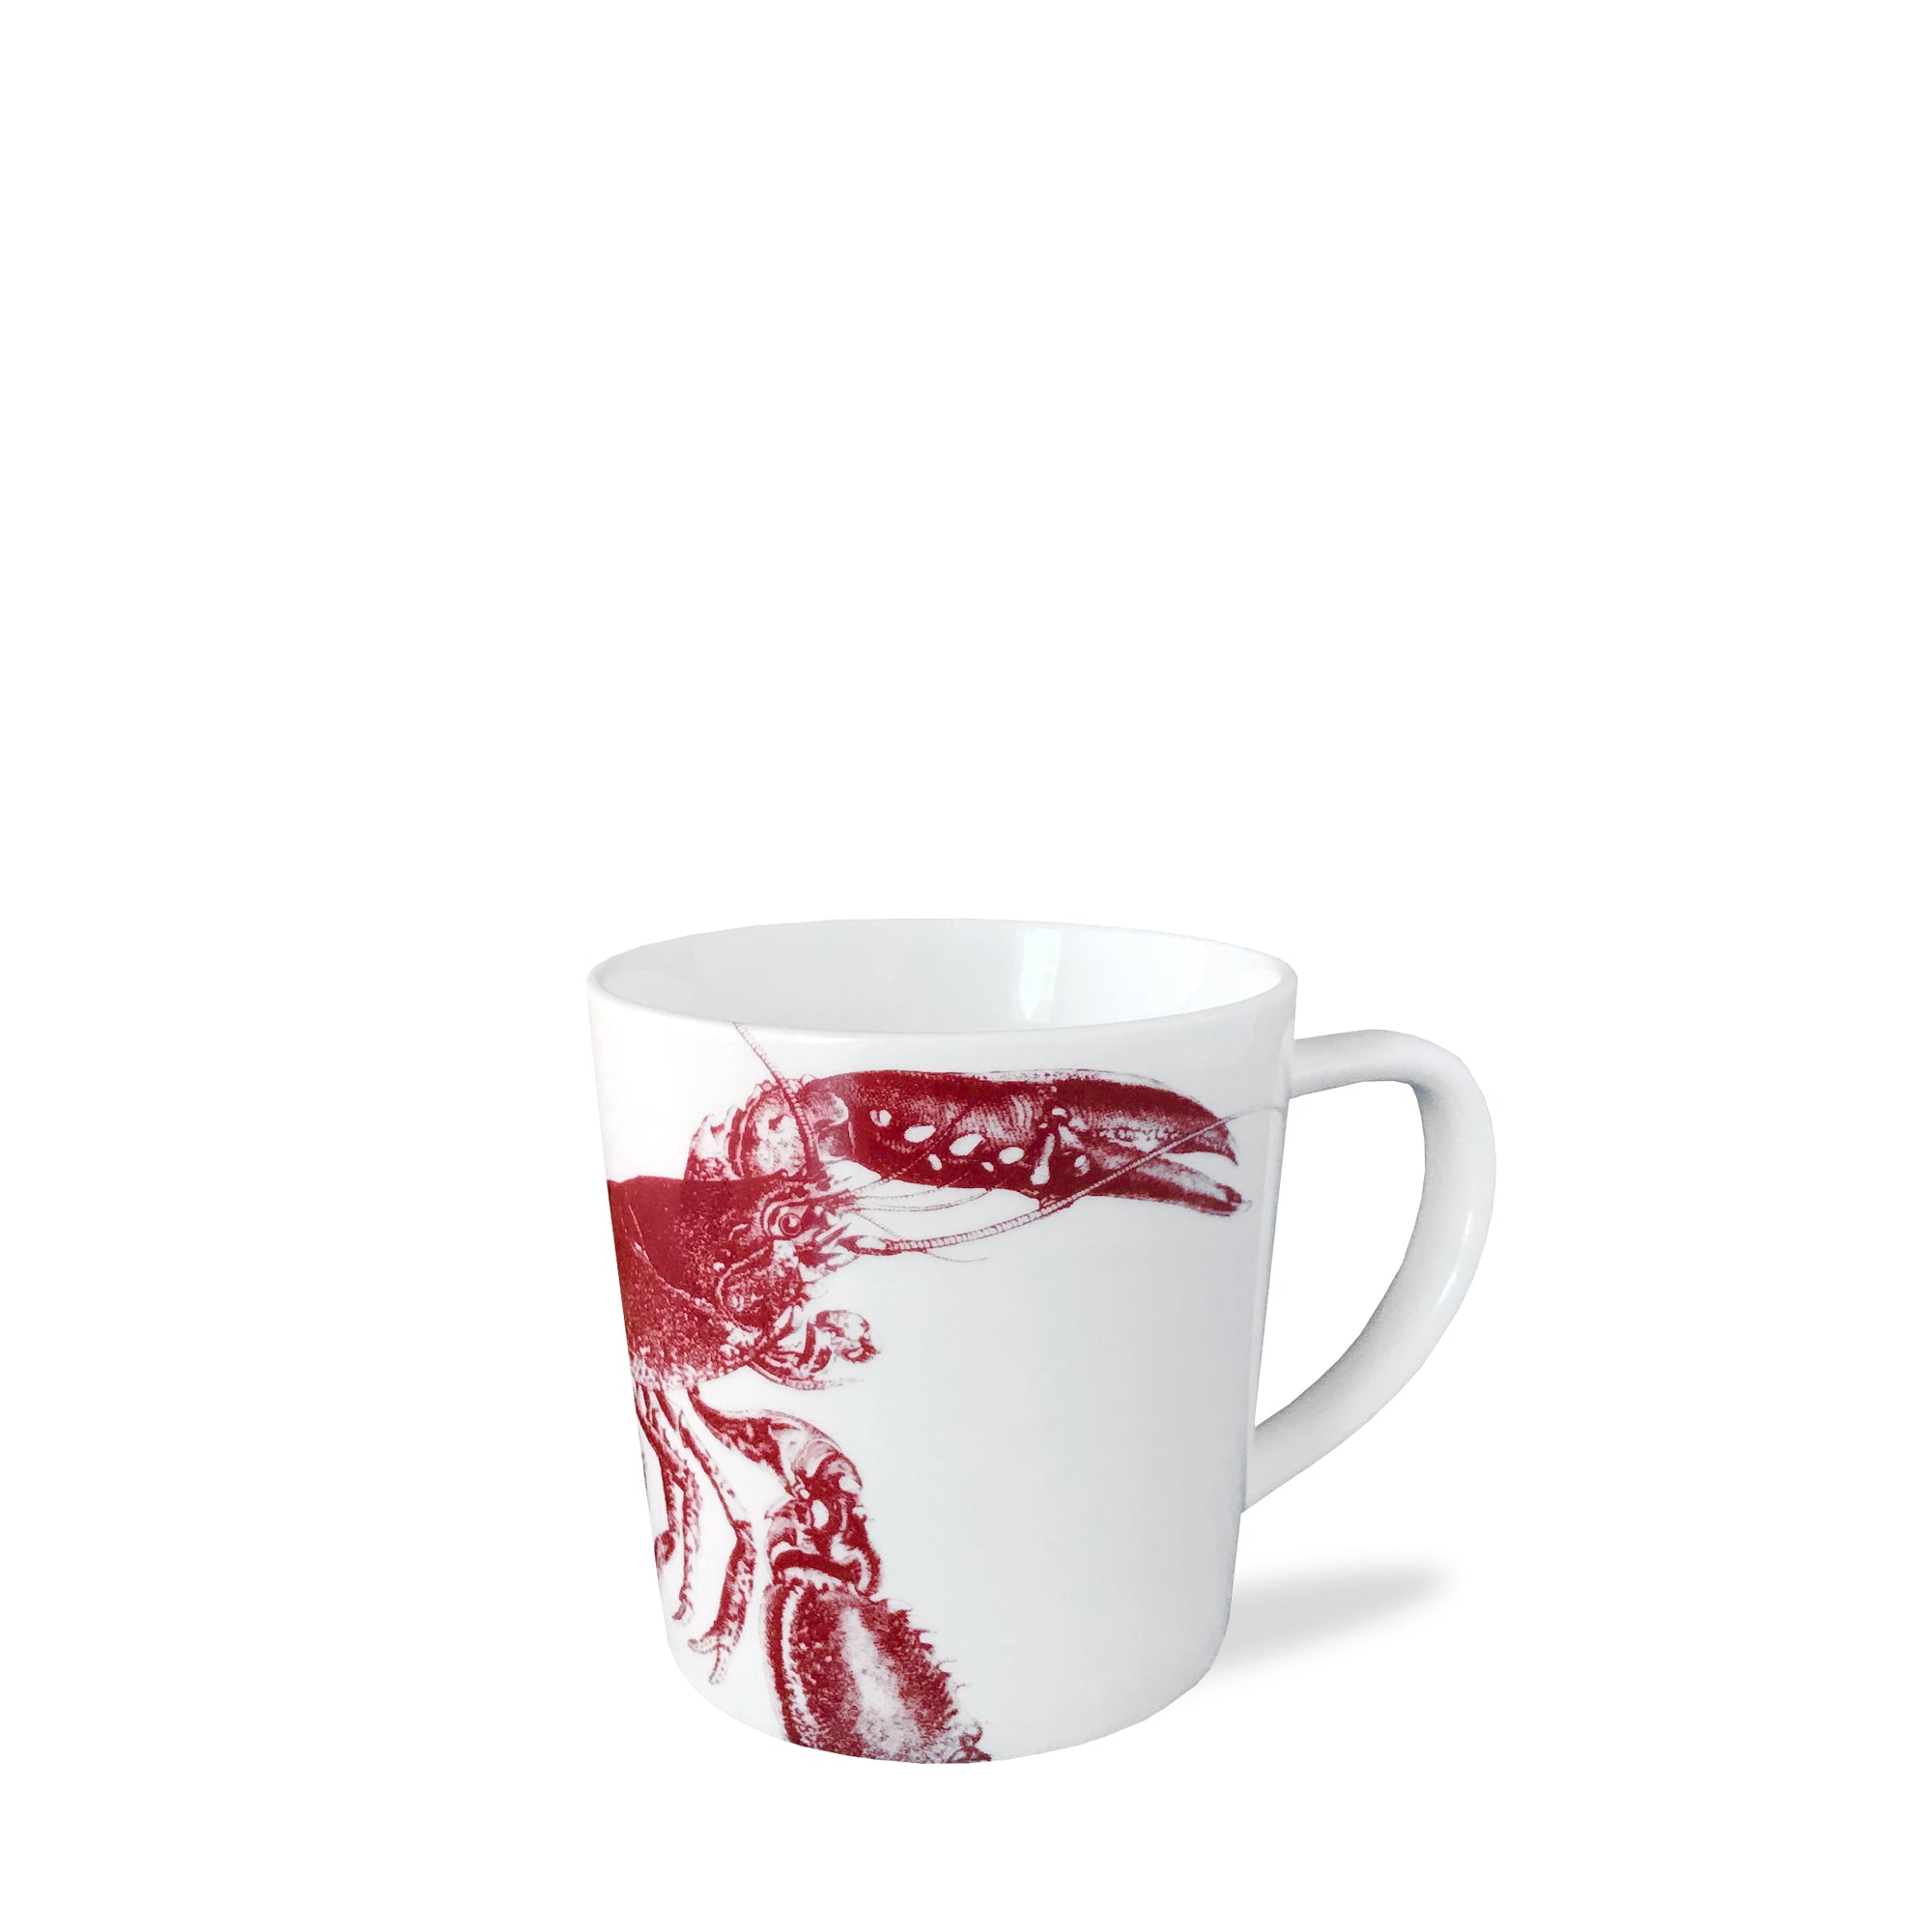 A high-fired porcelain Lobster Red Mug by Caskata Artisanal Home featuring a red lobster illustration on the side, perfect for adding a touch of seaside style to your kitchen.